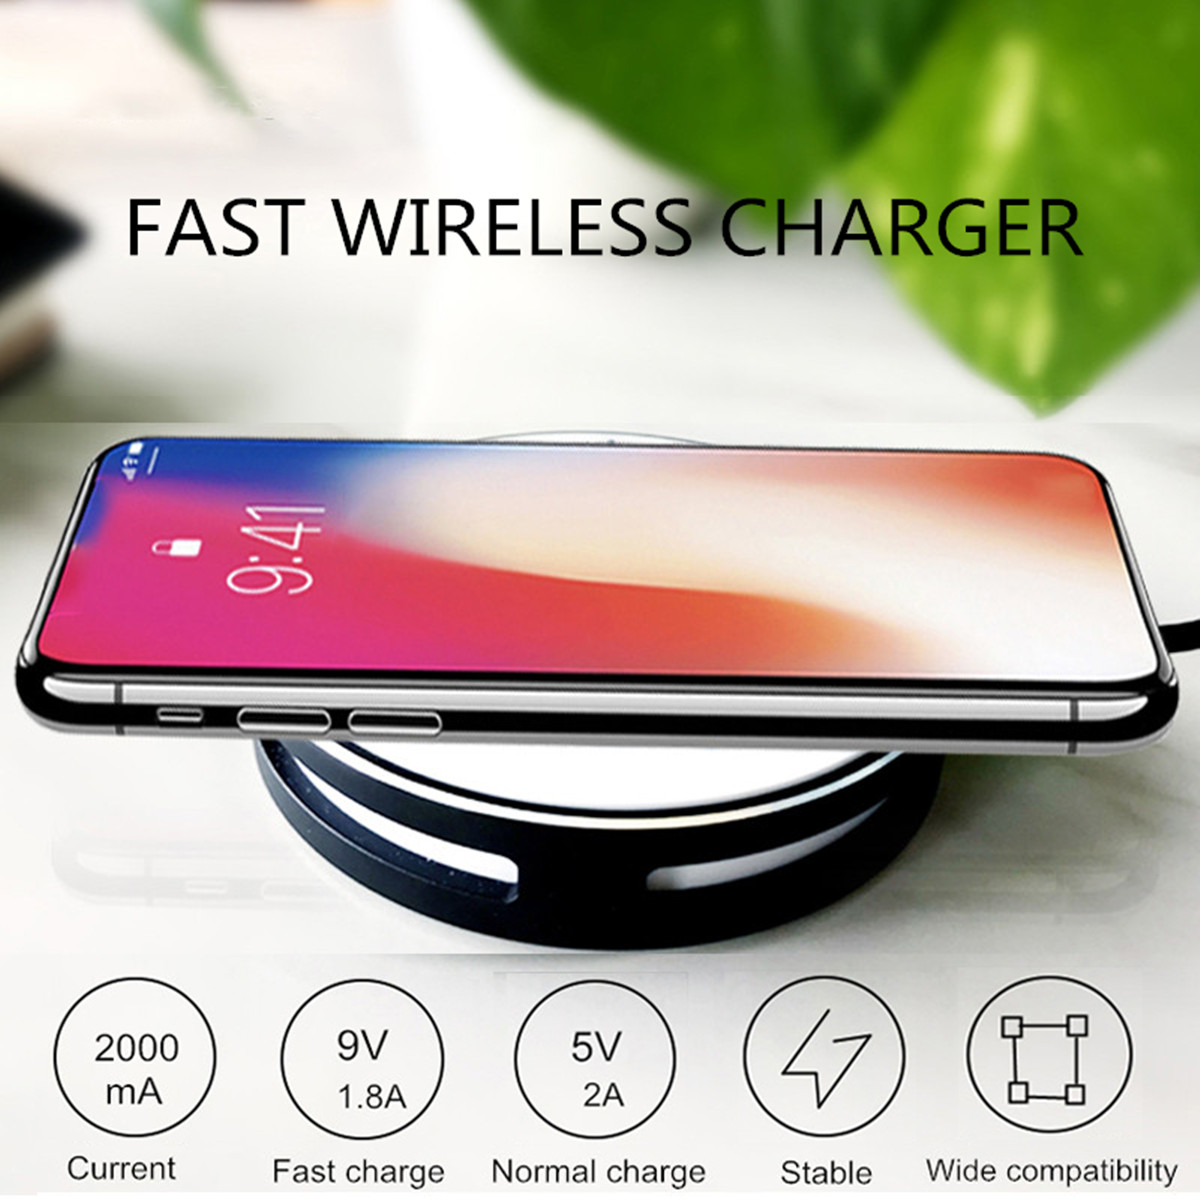 9V Qi Standard Wireless LED Fast Charger Desktop Pad for iPhone 8 X Plus S8 S9 Note 8